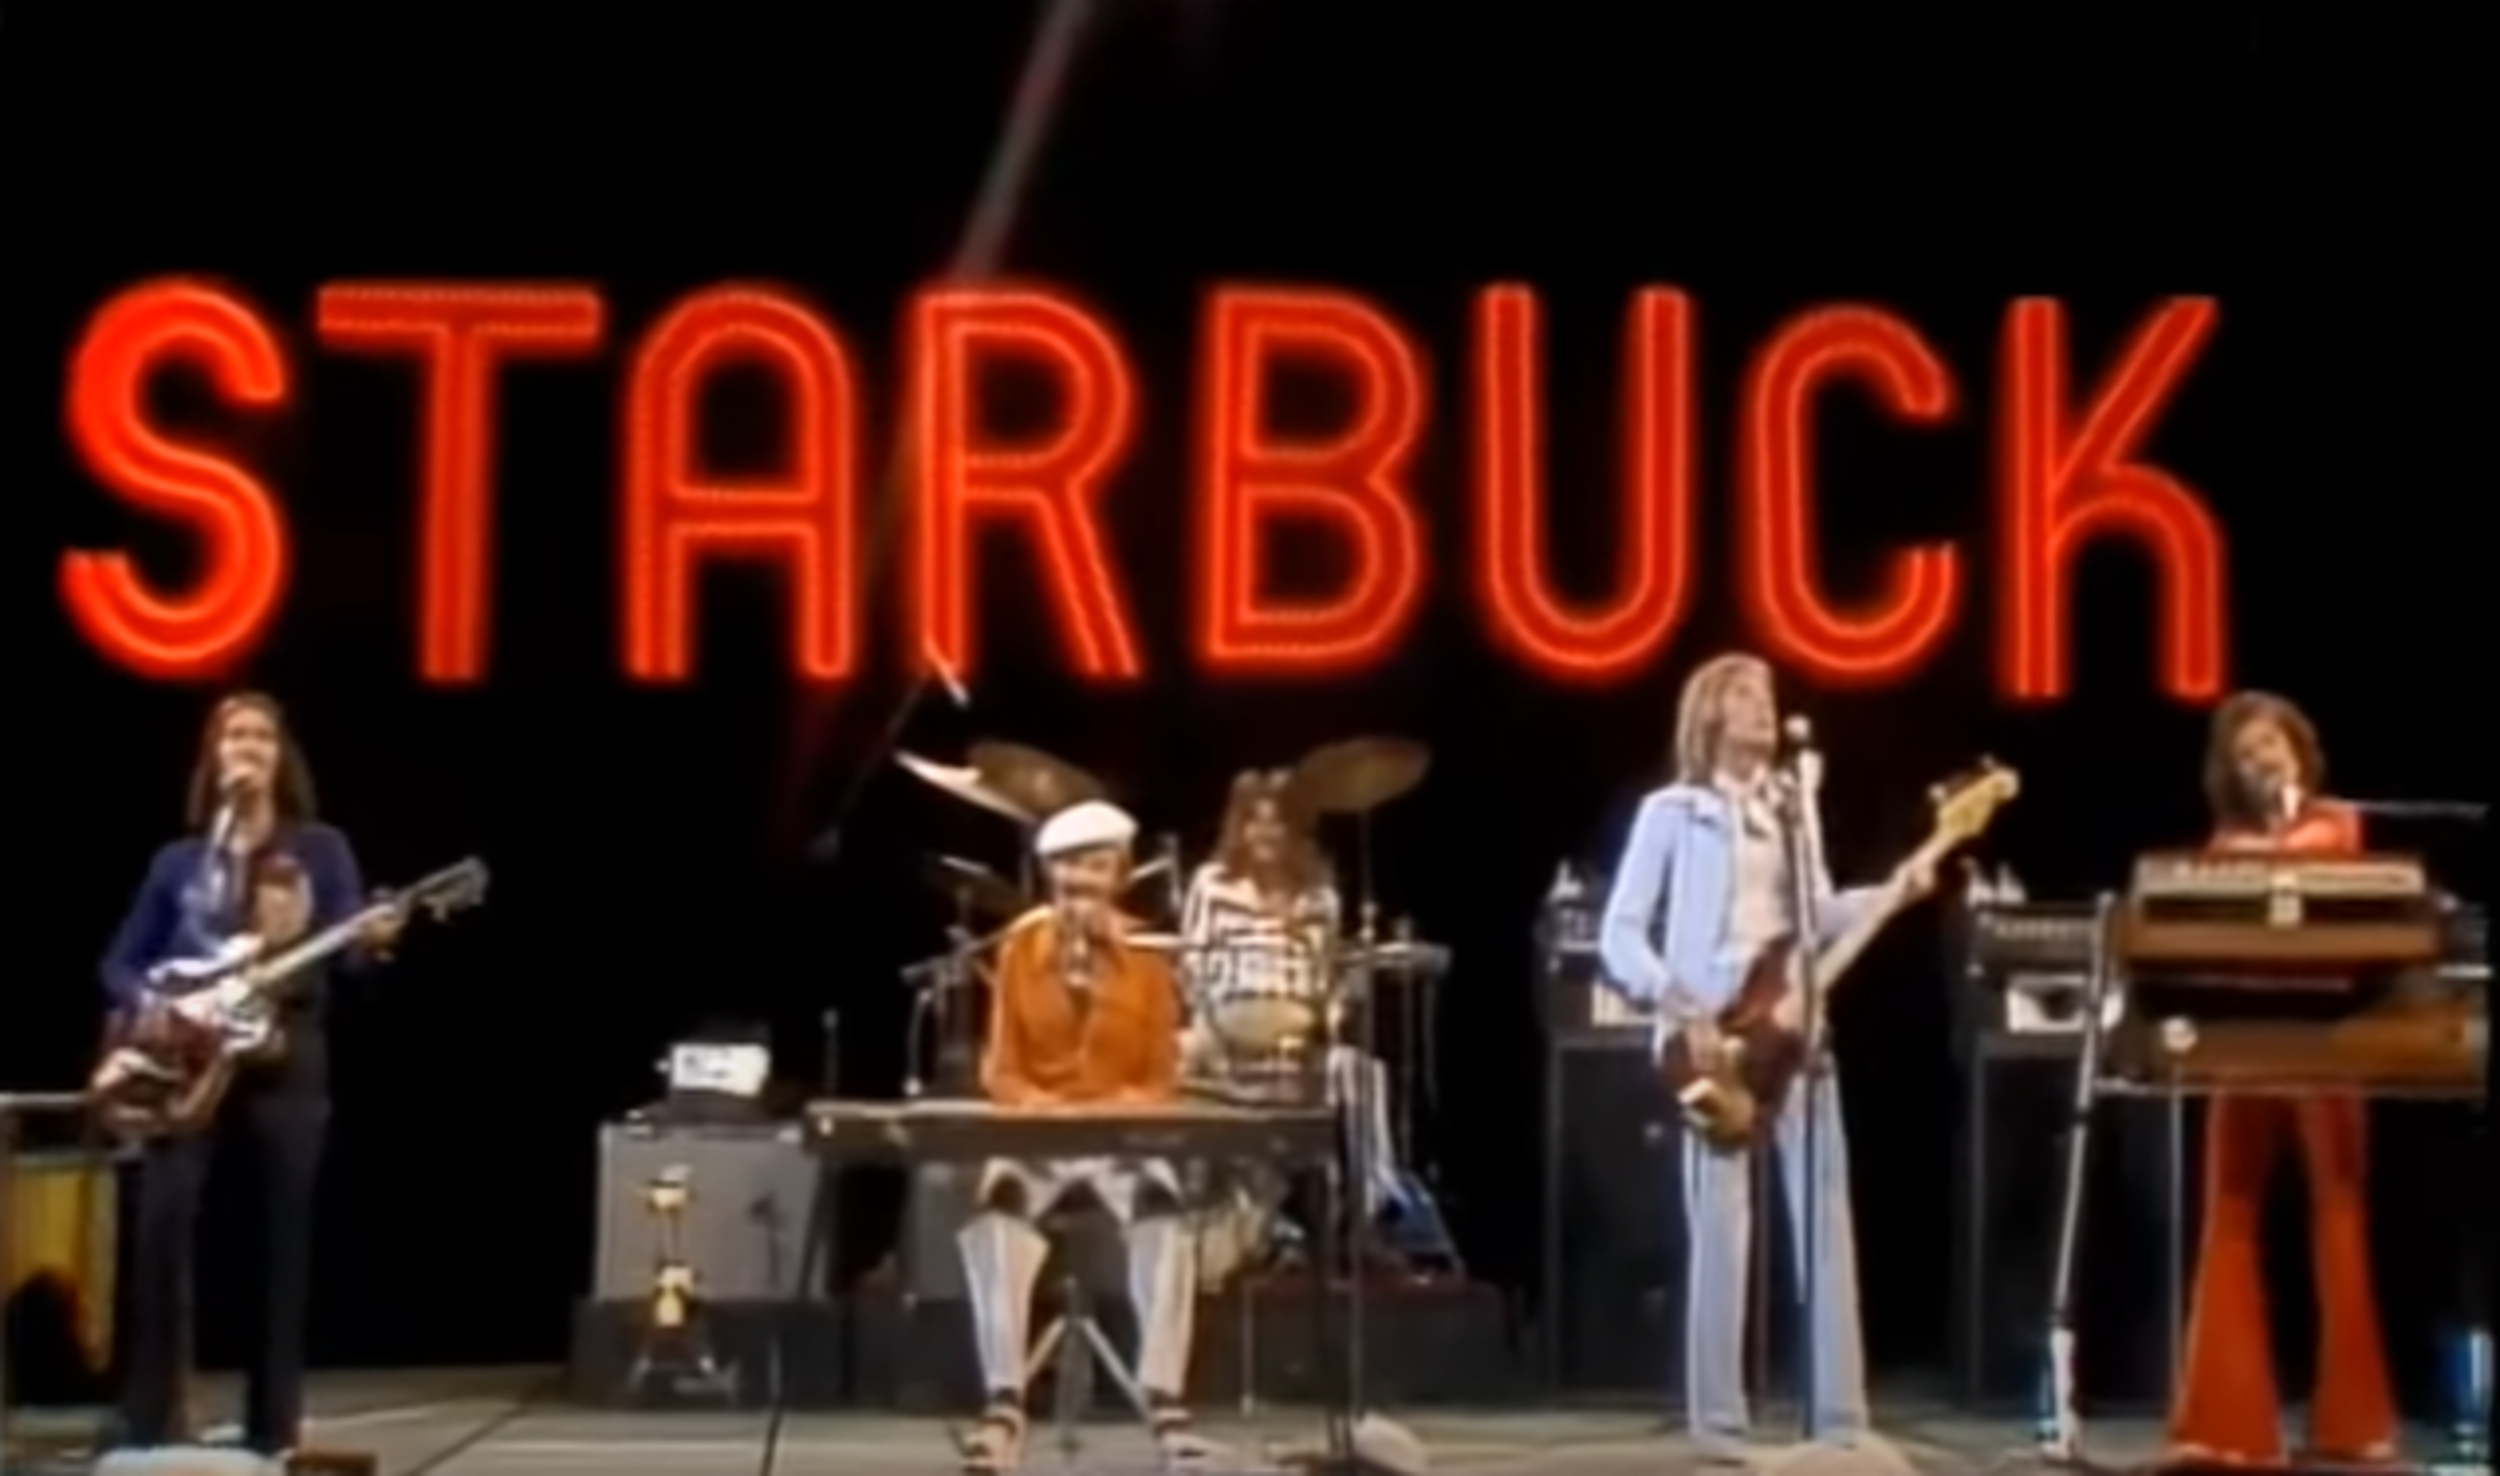 <p>Here's a case where middle-aged and baby-boomer music fans probably remember the song but perhaps not the group who performed the track. That's OK. Atlanta's Starbuck is essentially a one-hit wonder thanks to <a href="https://www.youtube.com/watch?v=HYnQsvtfEsQ">"Moonlight Feels Right,"</a> which topped out at No. 3 on <em>Billboard</em>'s Hot 100. For those who remember this track for its lite-flowing beat, with lyrical references to the ocean, "Baltimore," and 'Ole Miss," and band member Bo Wagner marimba solo, it might take them back to a simpler, more laidback time in their lives.</p><p><a href='https://www.msn.com/en-us/community/channel/vid-cj9pqbr0vn9in2b6ddcd8sfgpfq6x6utp44fssrv6mc2gtybw0us'>Follow us on MSN to see more of our exclusive entertainment content.</a></p>